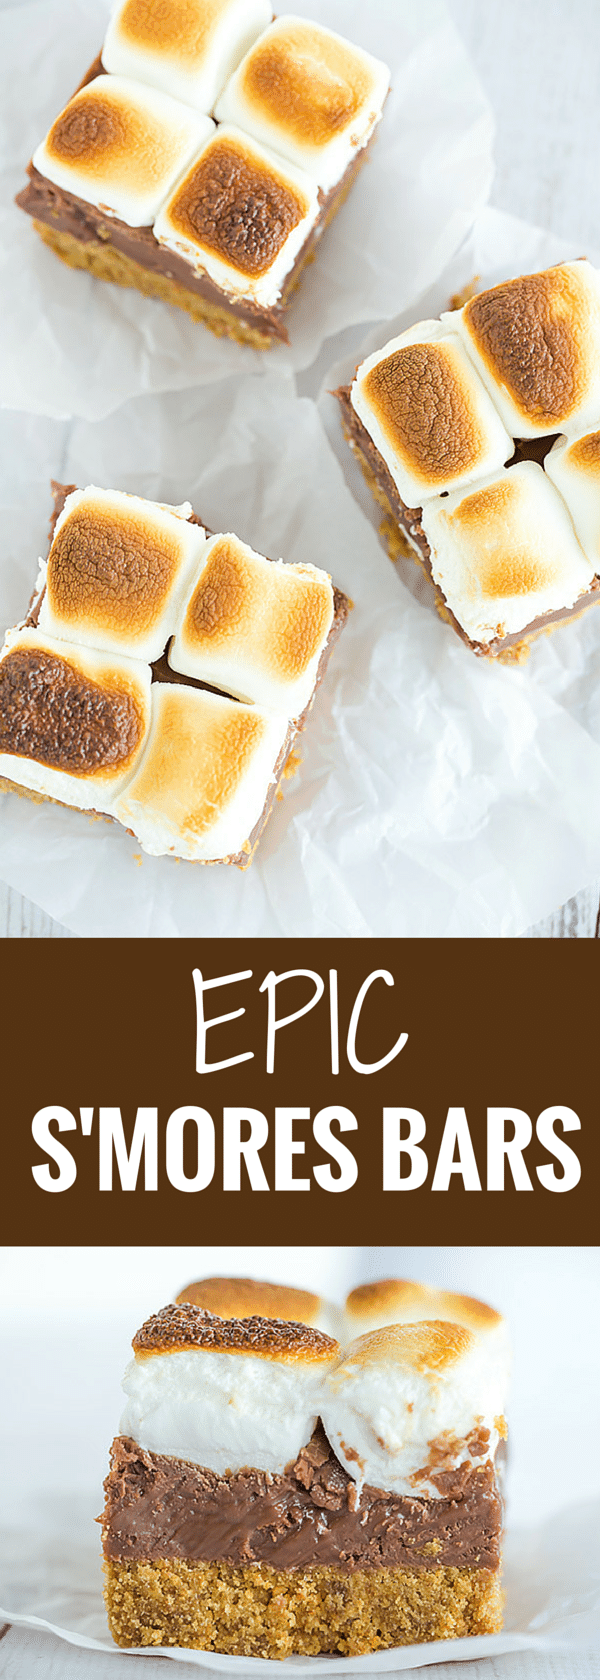 These s'mores bars boast a thick graham crust, a fudgy milk chocolate layer, and are topped with toasted marshmallows, of course!